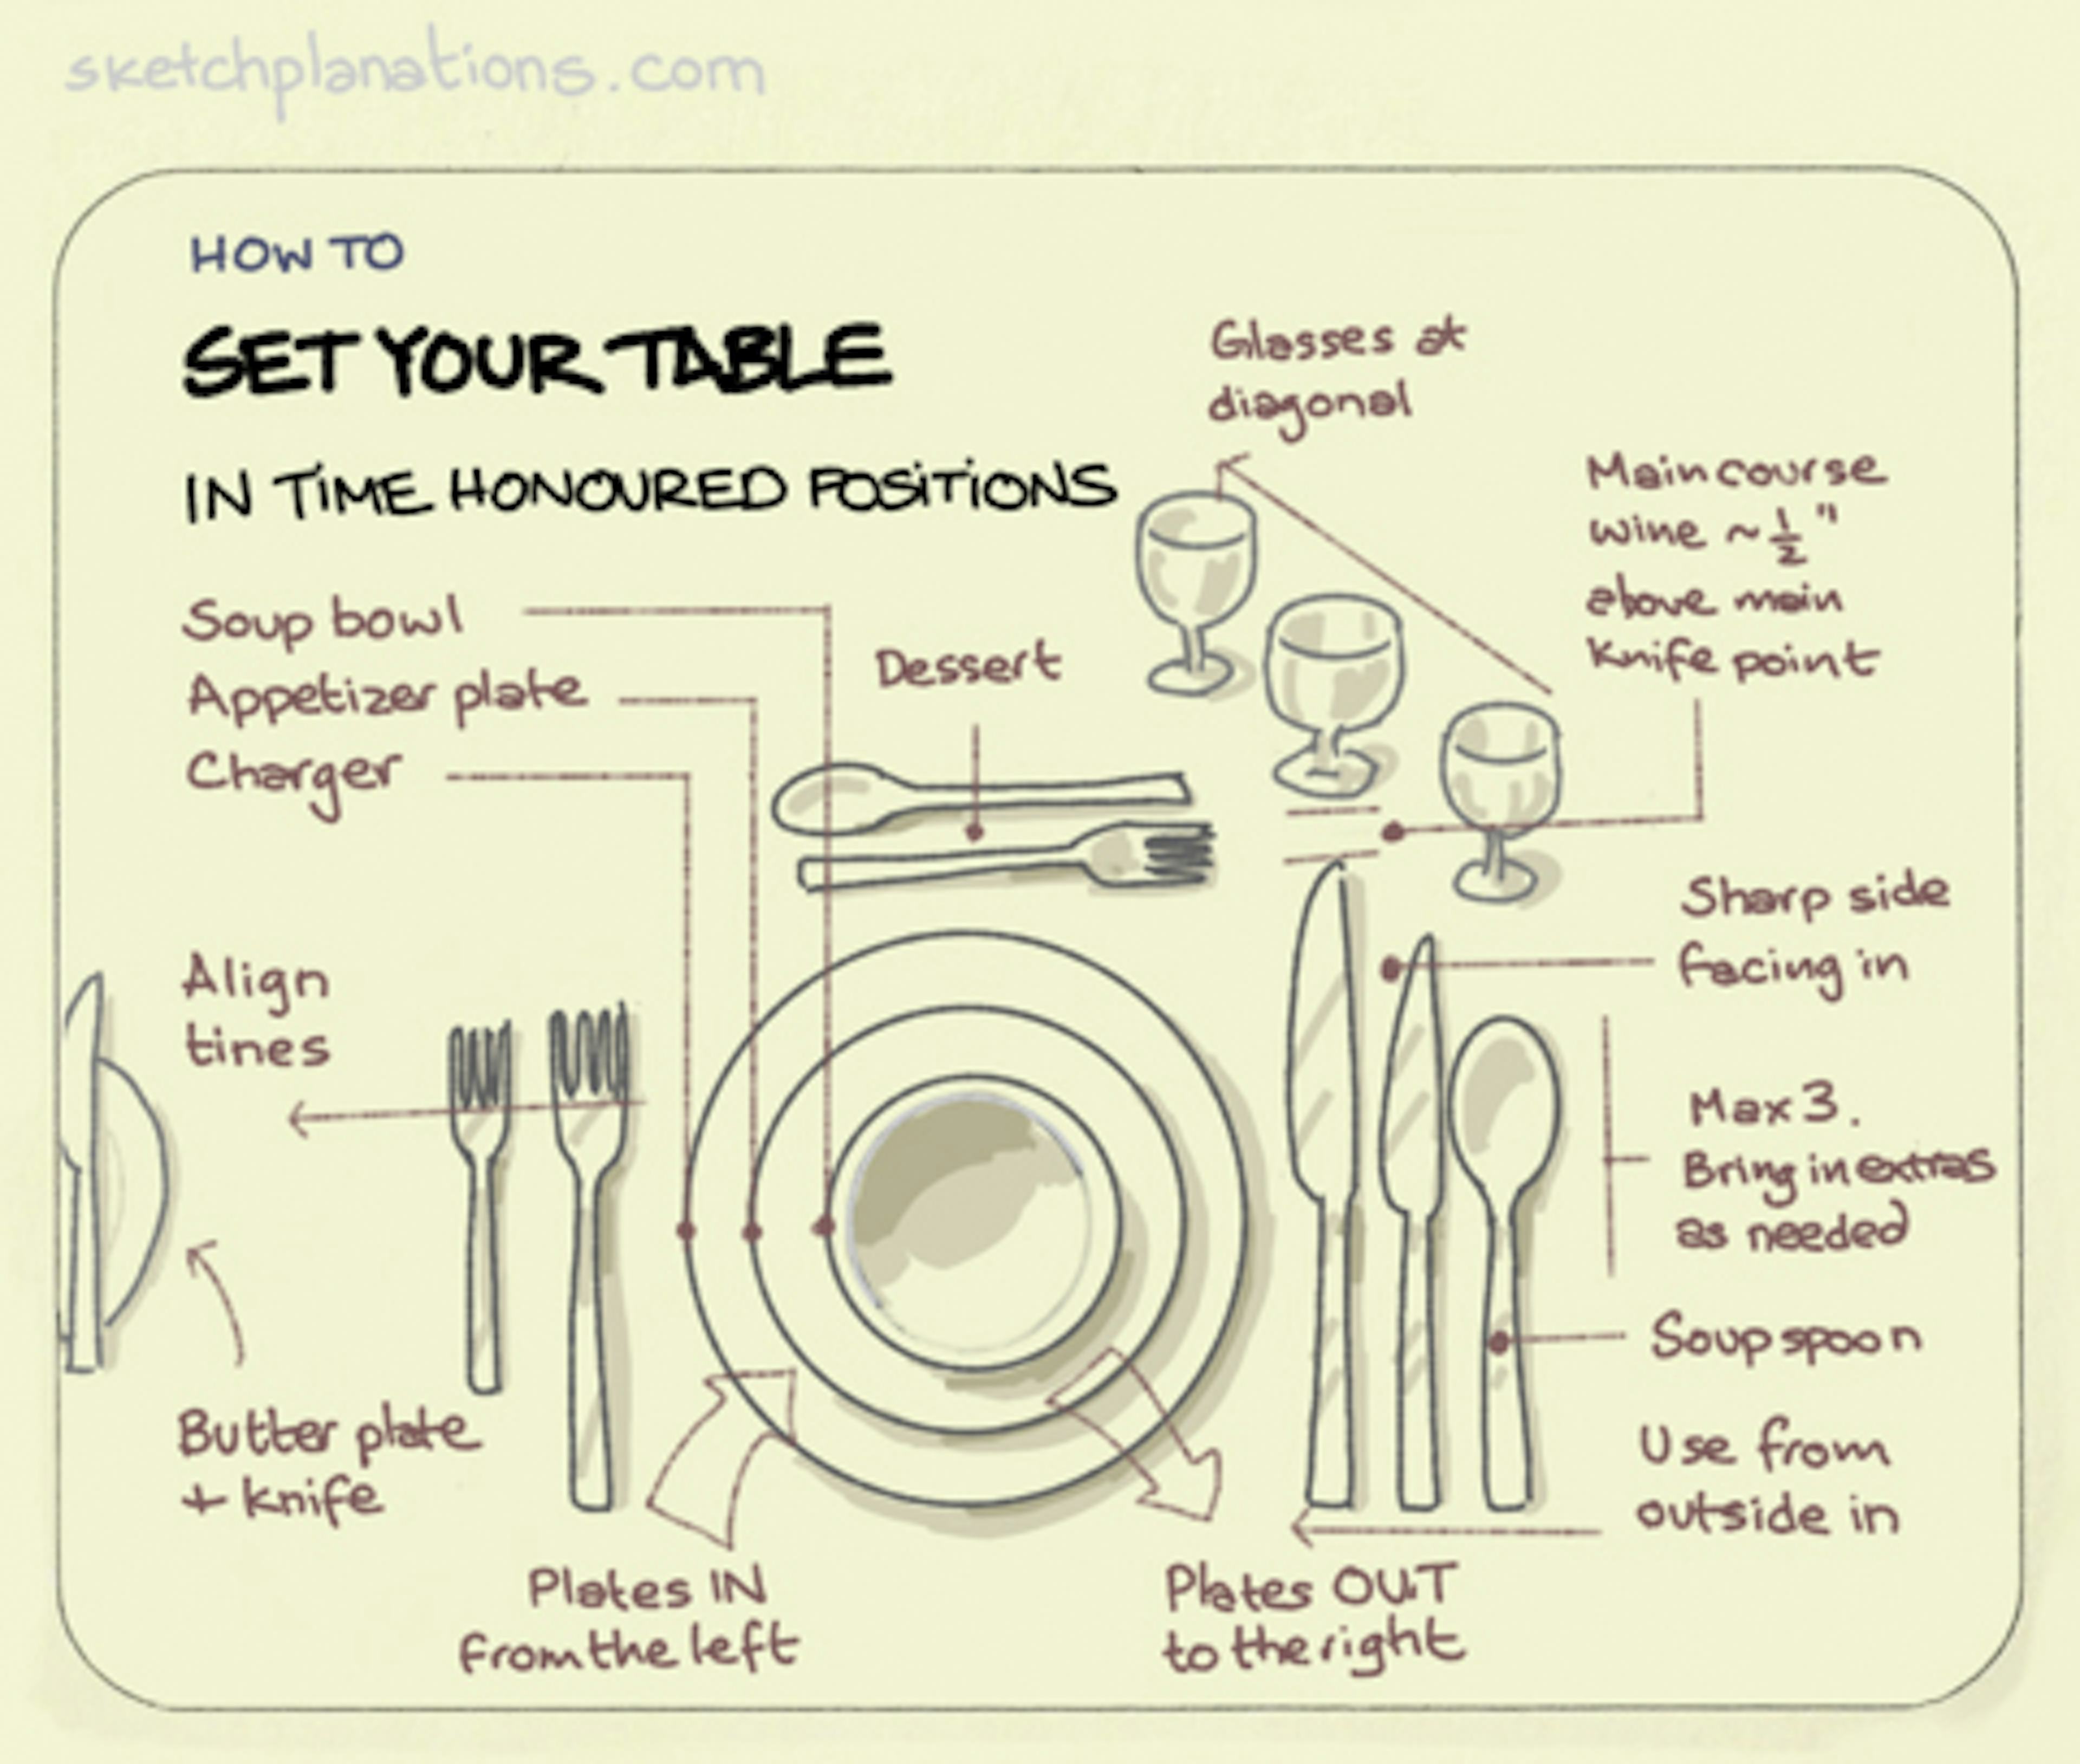 Set your table in time-honoured positions. - Sketchplanations